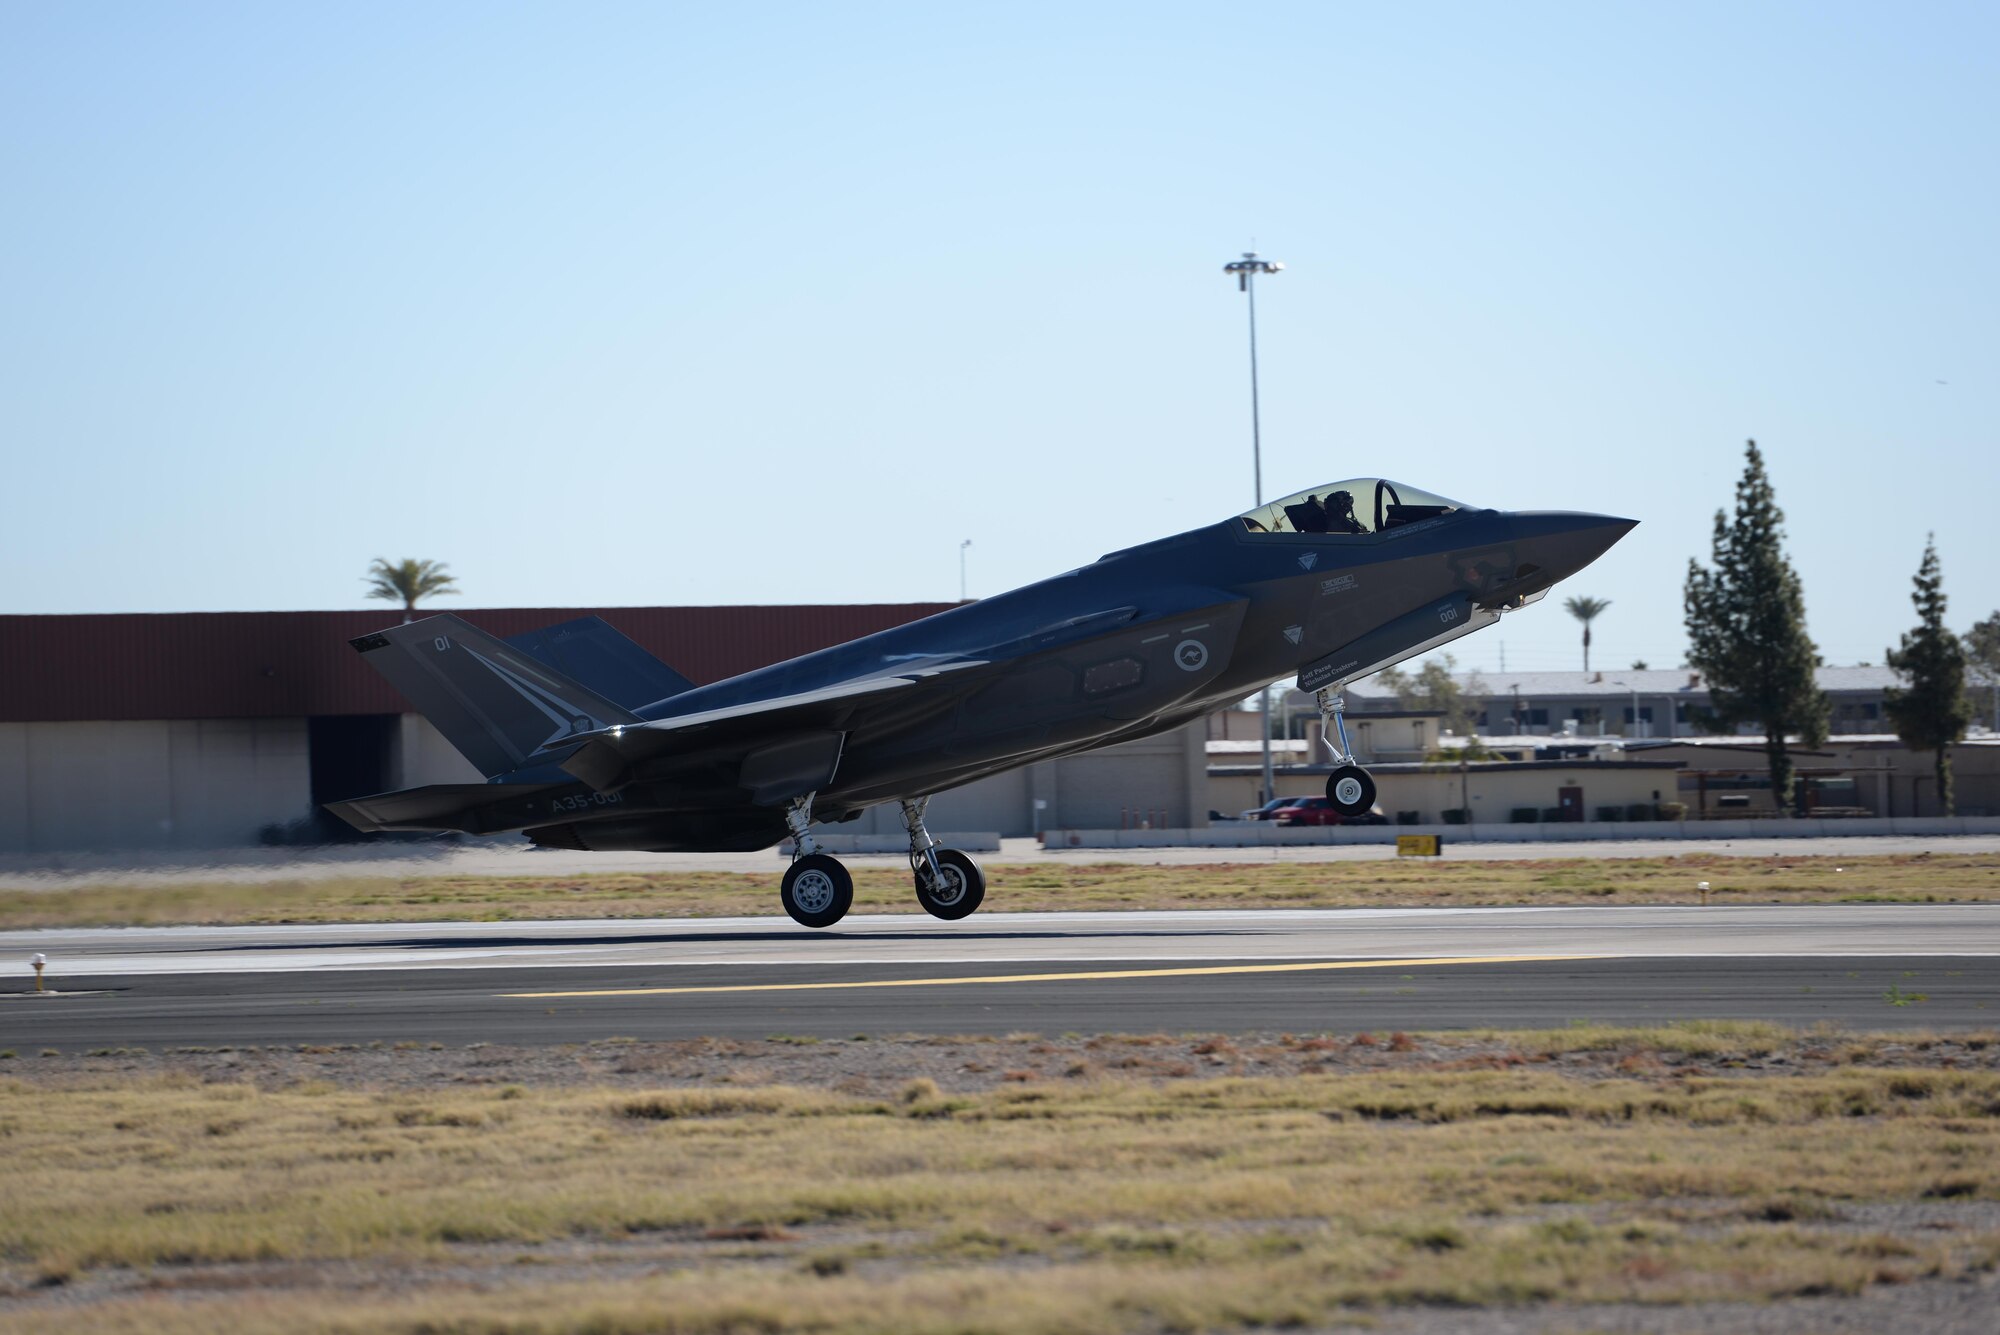 An Australian F-35 Lightning II lands at Luke Air Force Base Feb. 2, 2016. Luke conducts a joint international F-35 training mission with partner nations Norway, Italy, and Australia. The F-35 is a fifth-generation all-weather multi-role strike fighter. 